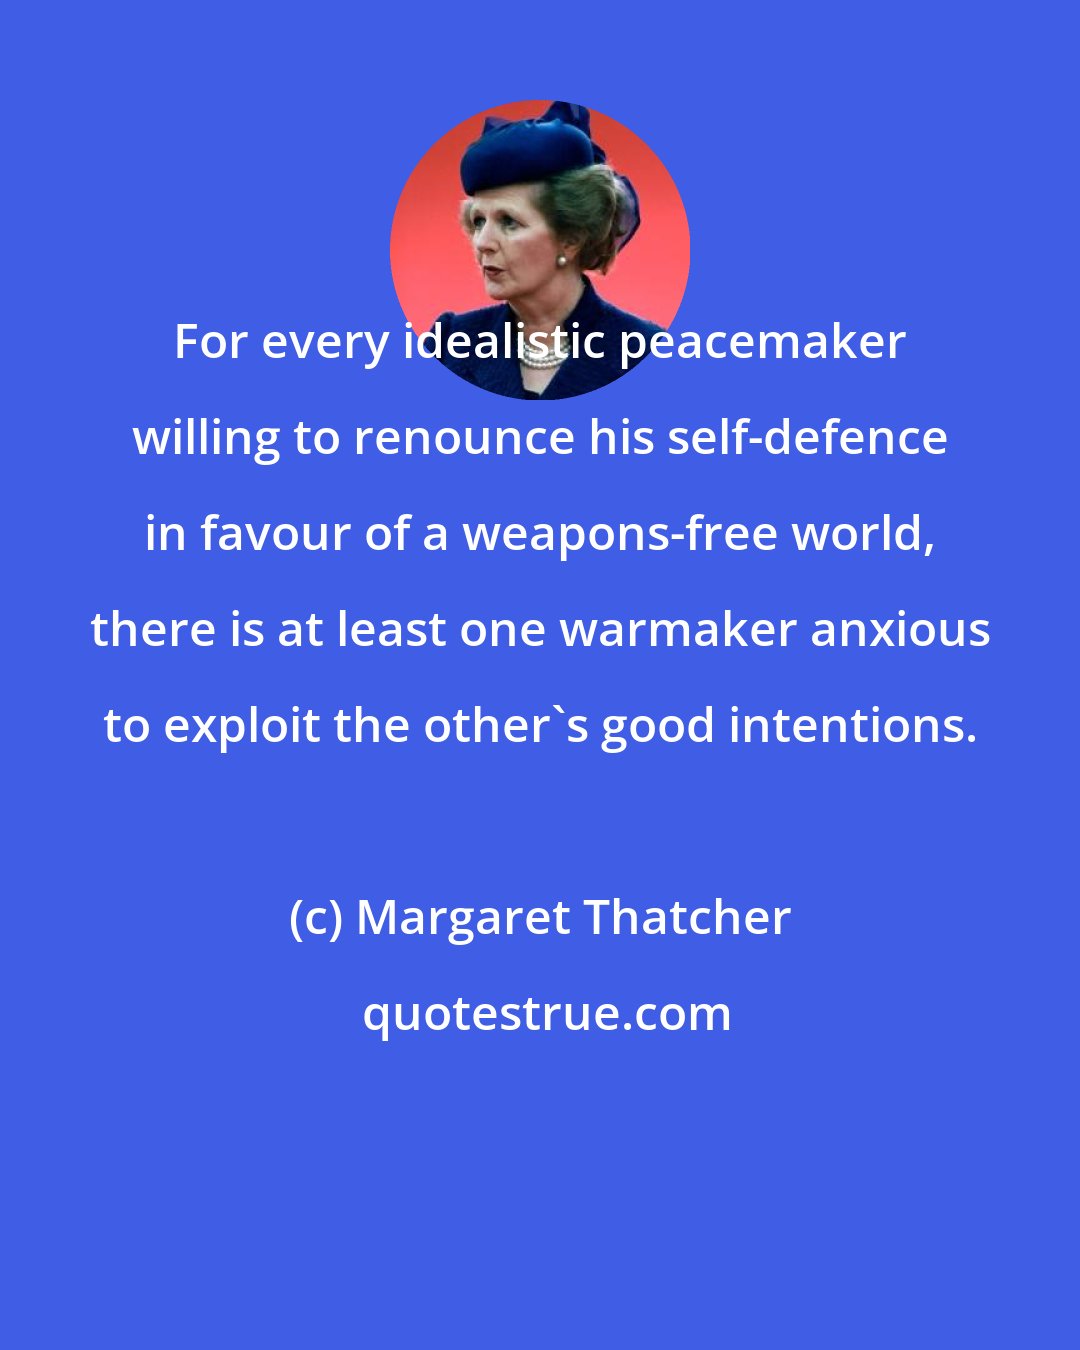 Margaret Thatcher: For every idealistic peacemaker willing to renounce his self-defence in favour of a weapons-free world, there is at least one warmaker anxious to exploit the other's good intentions.